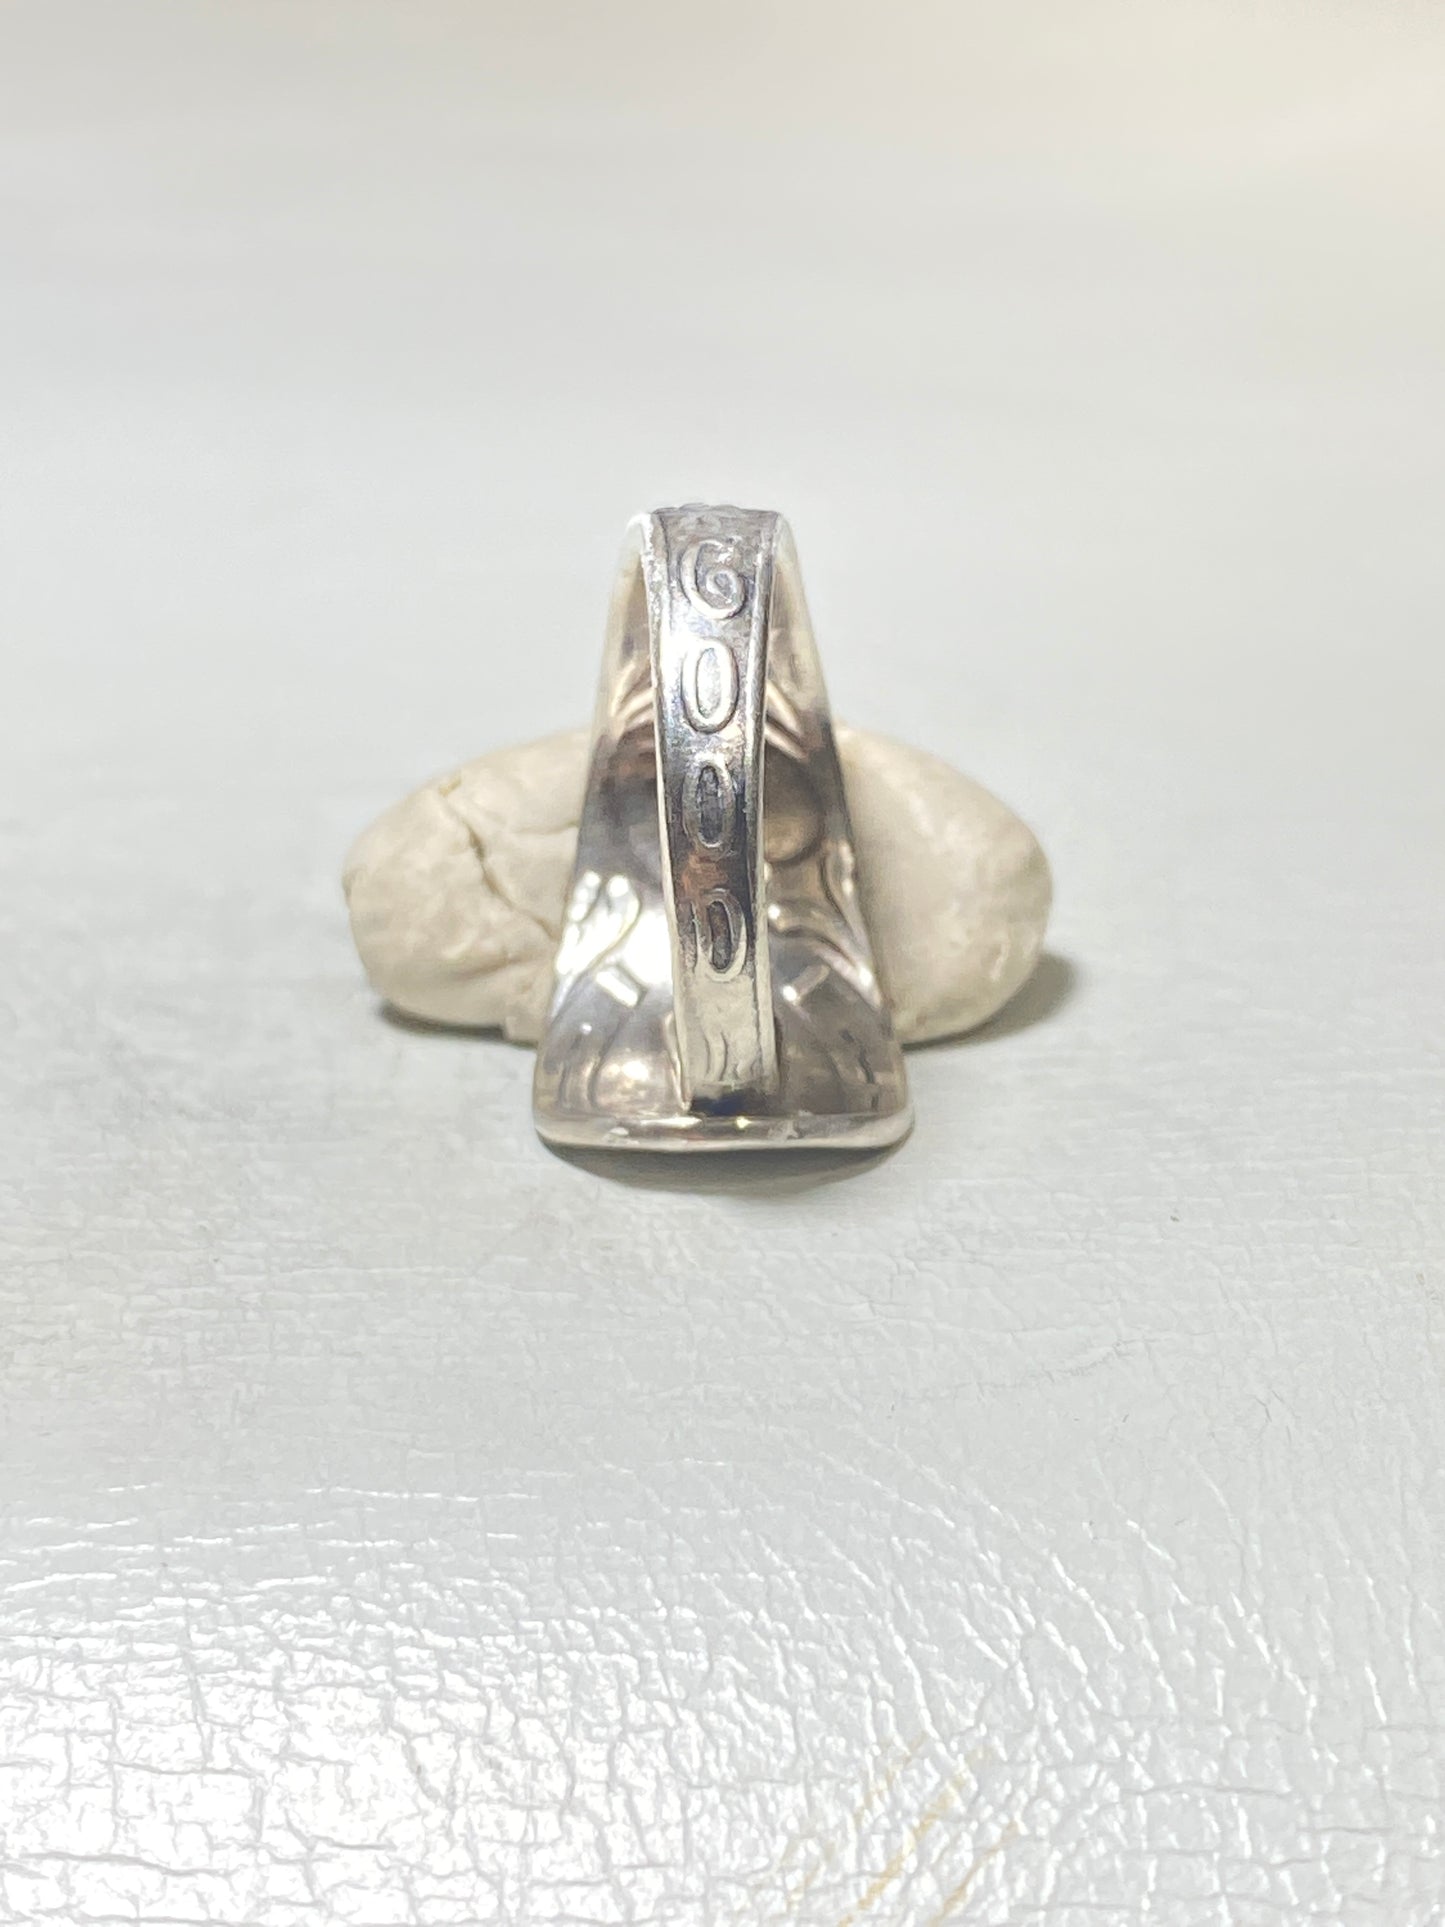 Spoon ring wishbone heart band four leaf clover good luck sterling silver women girls